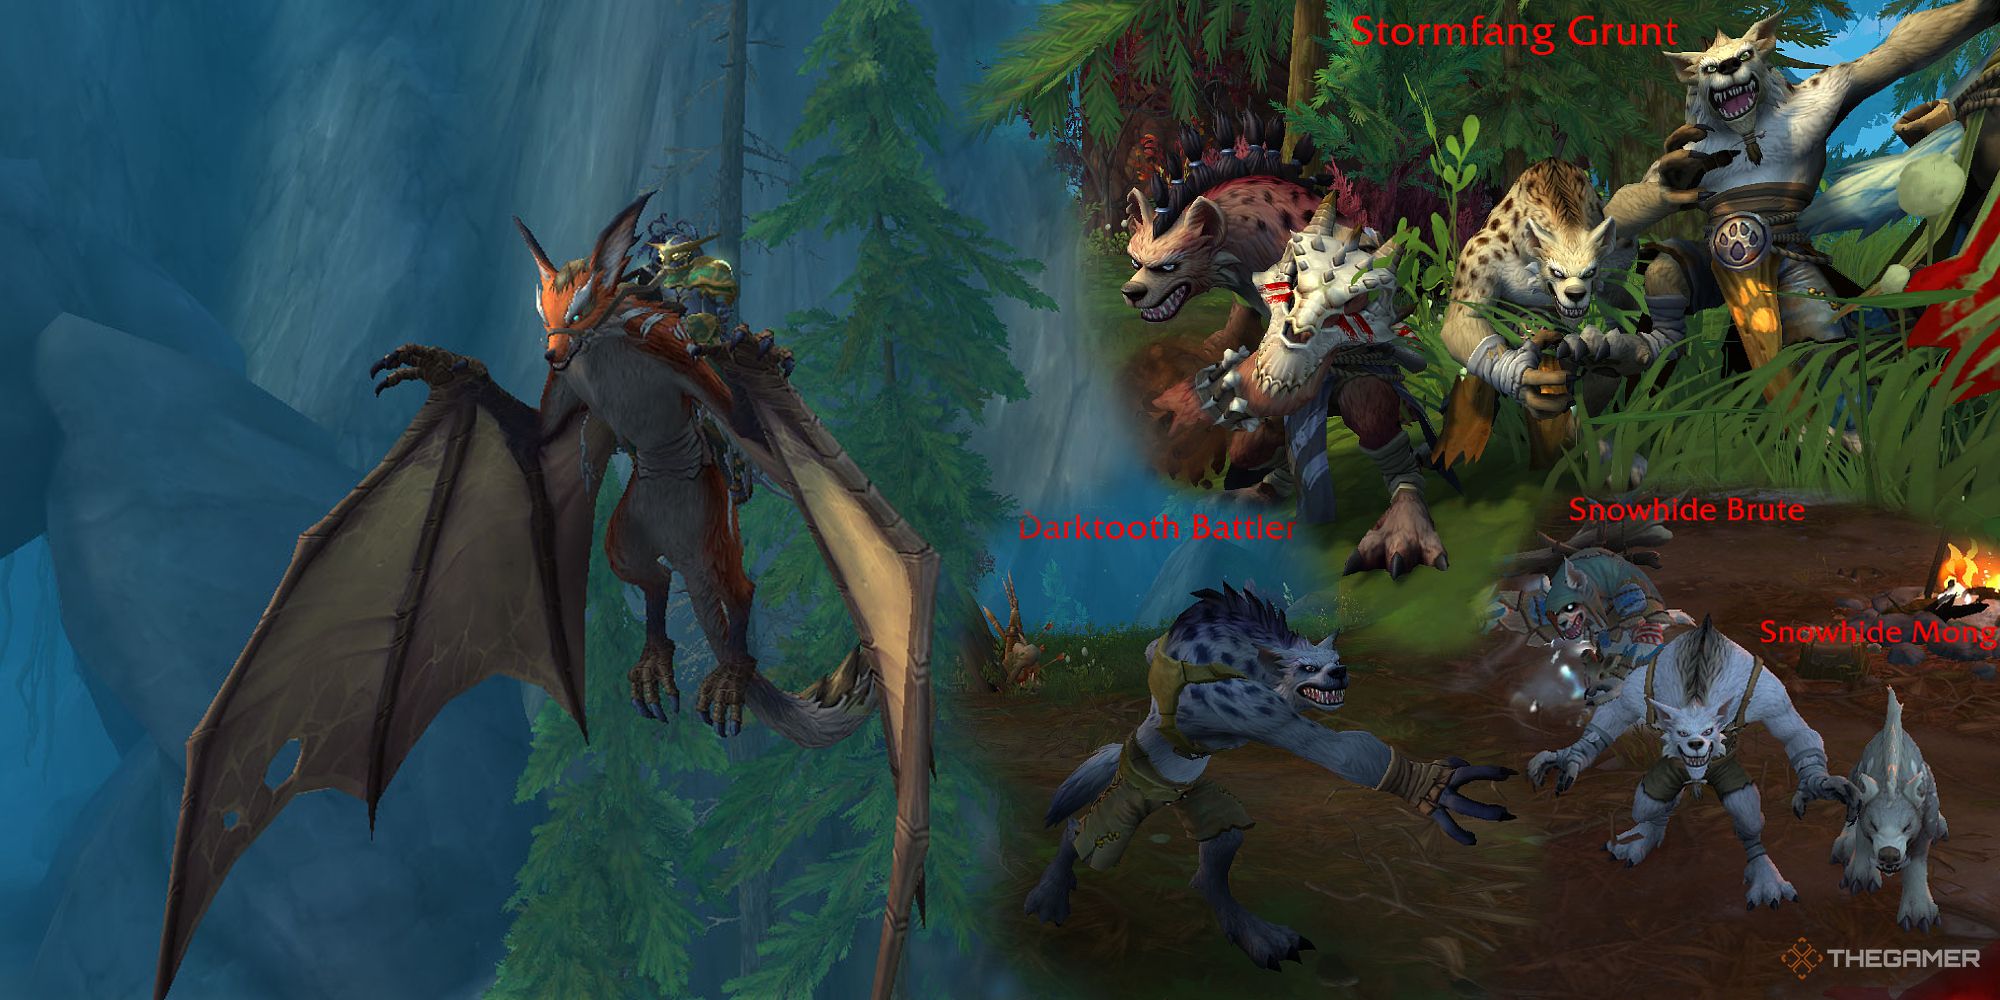 The Temperamental Skyclaw mount (left) and aggressive-looking Gnolls (right)